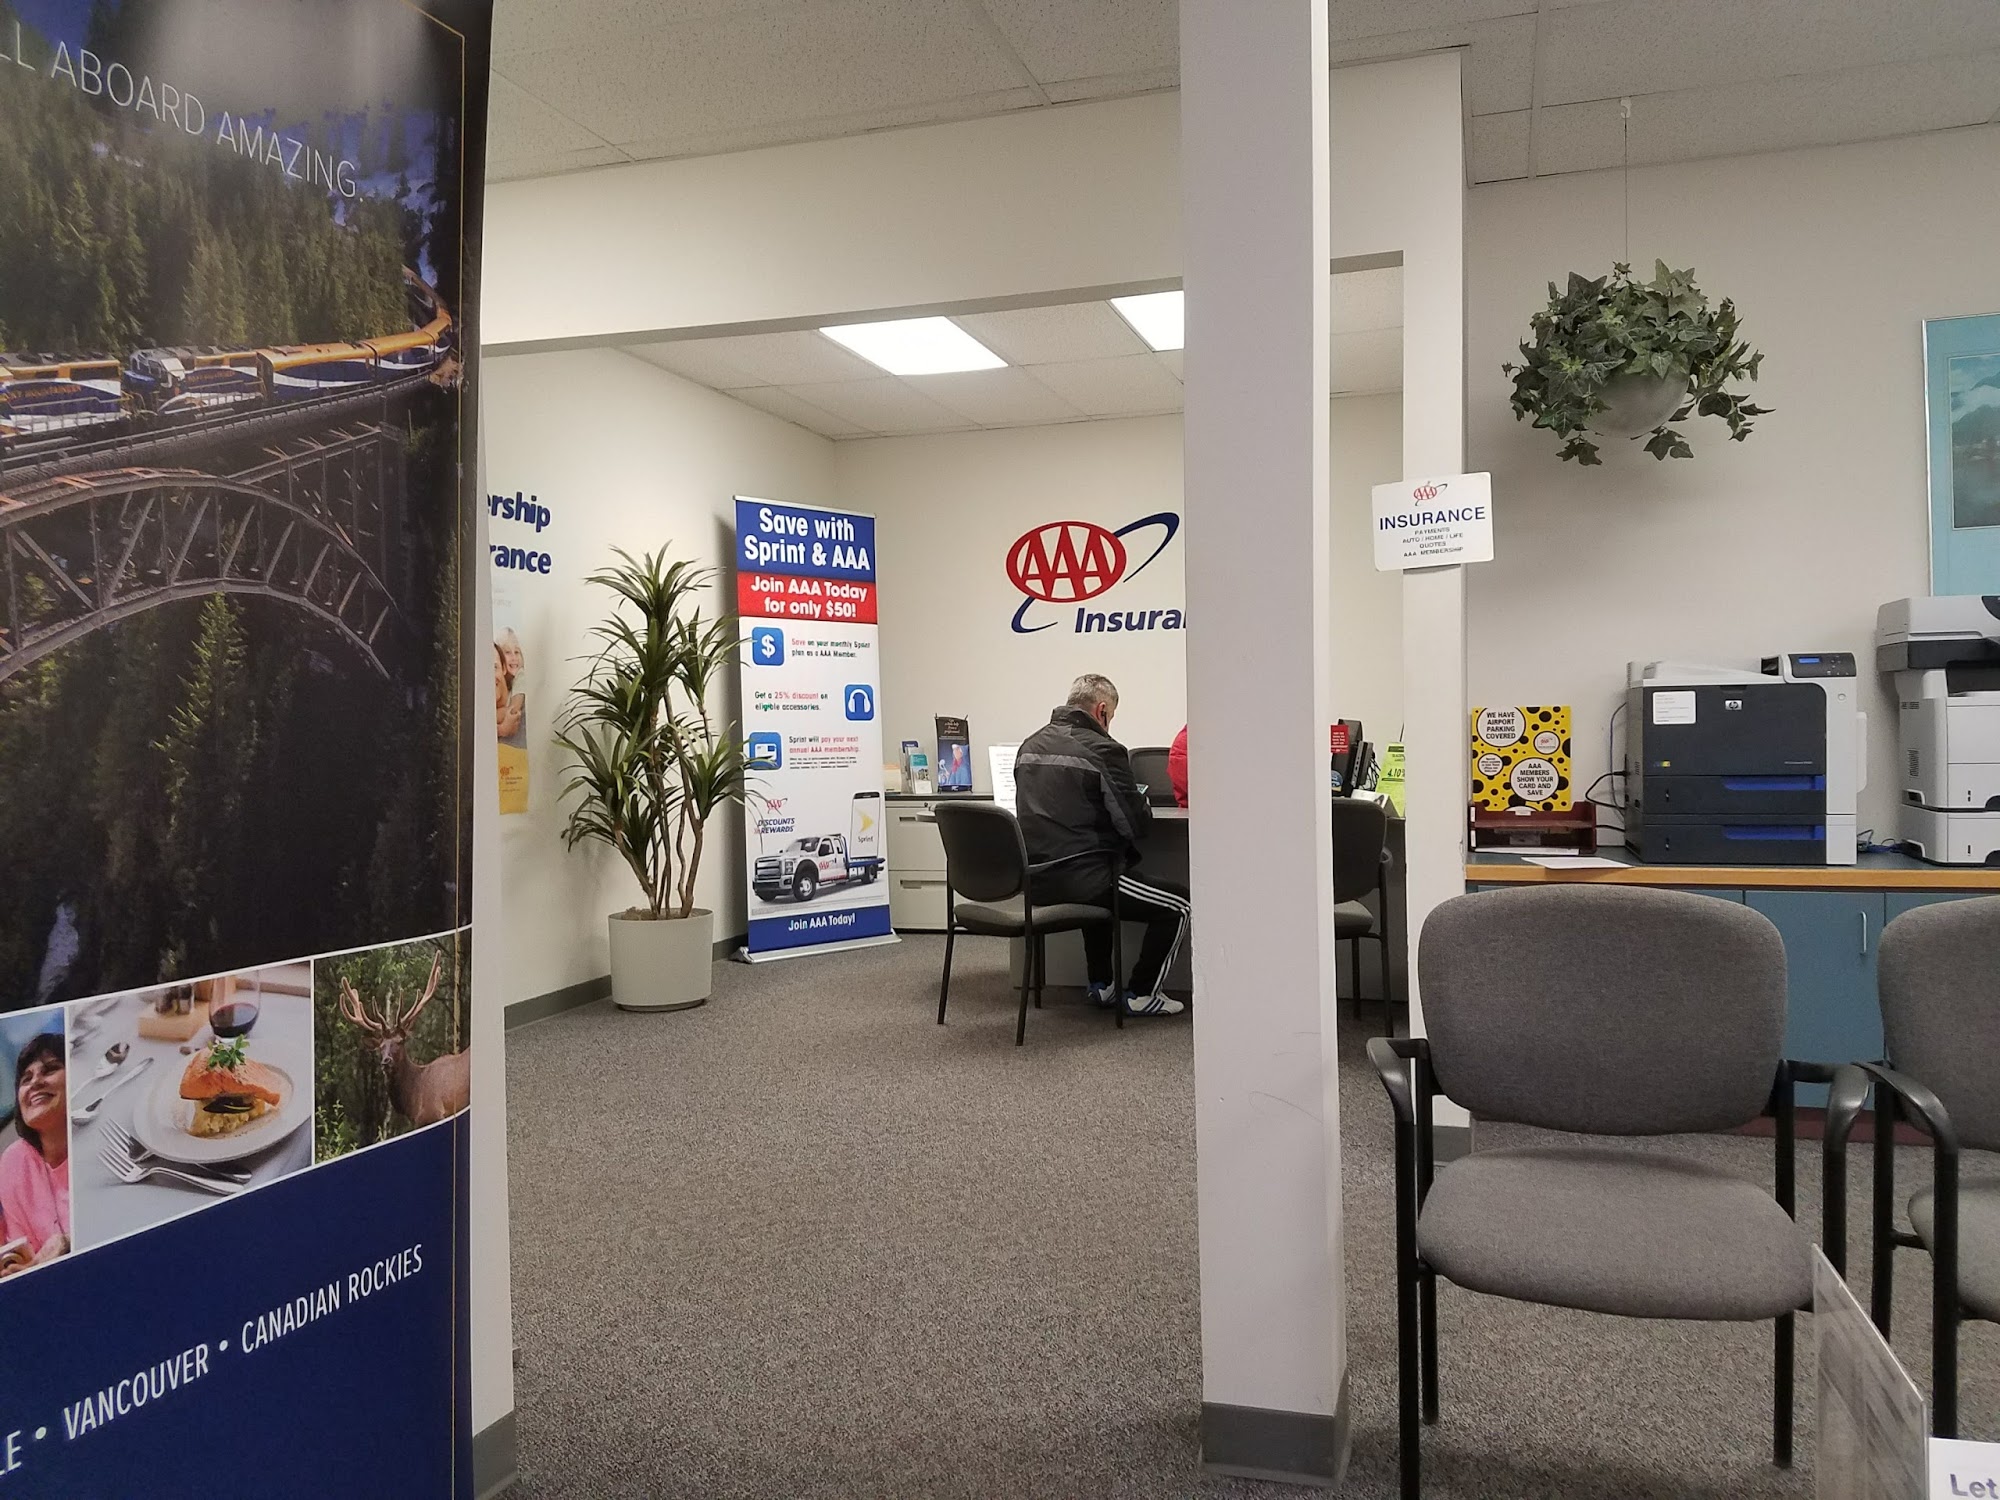 AAA Saint Louis Insurance and Member Services